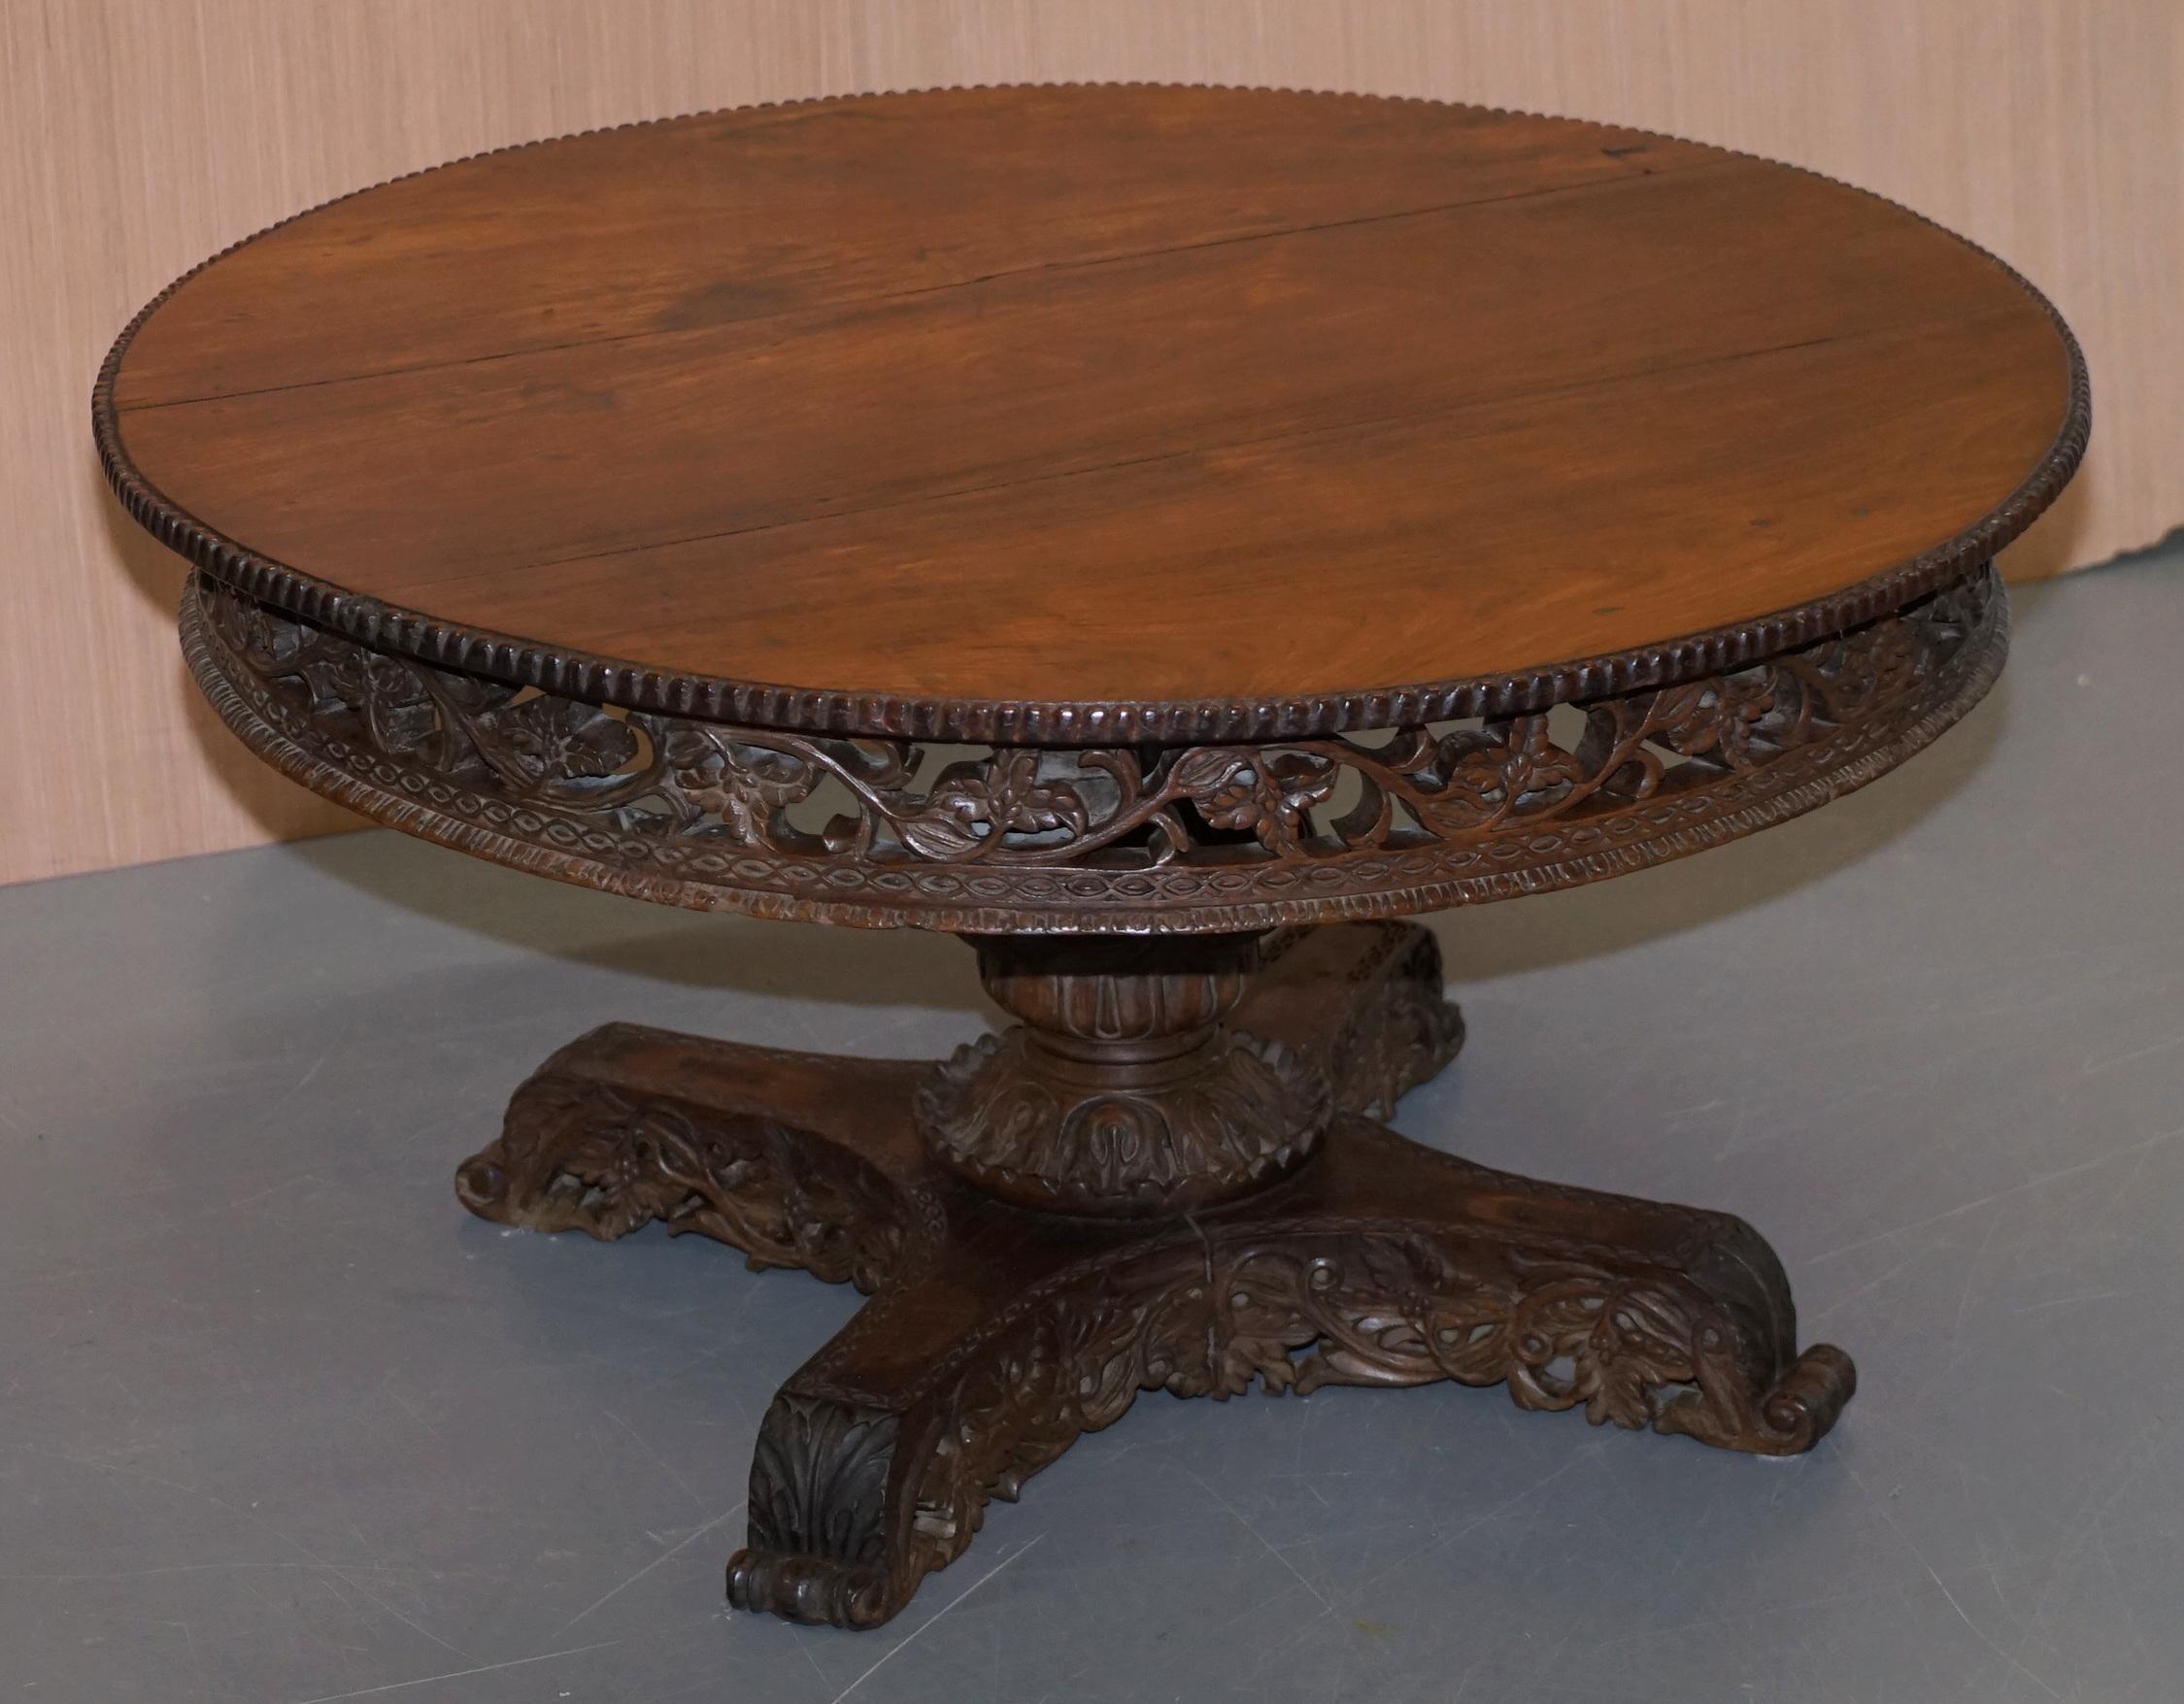 We are delighted to offer for sale this stunning circa 1880 Anglo-Indian hand carved coffee table in solid hardwood

A very good looking and collectable table, originally designed as a centre table however by western standards its to low to the